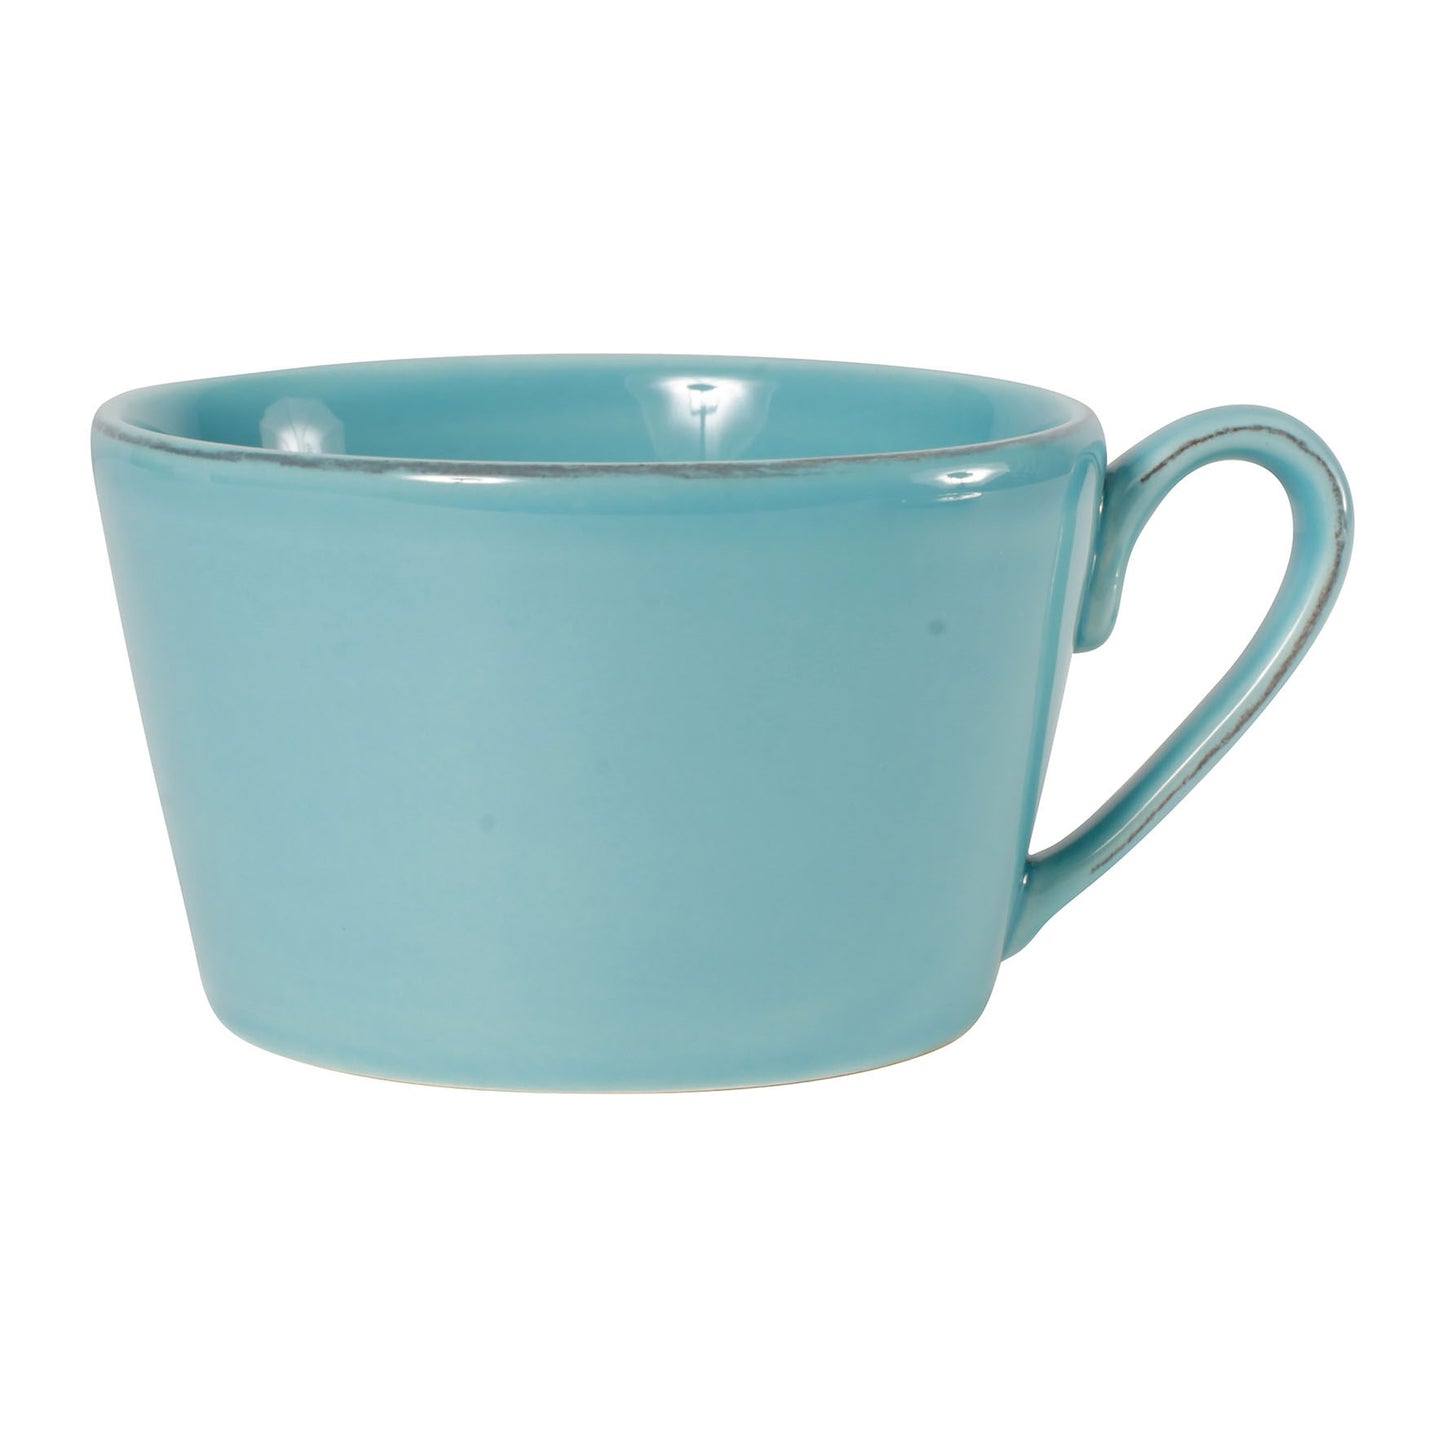 Cecilia Cup & Saucer - Turquoise